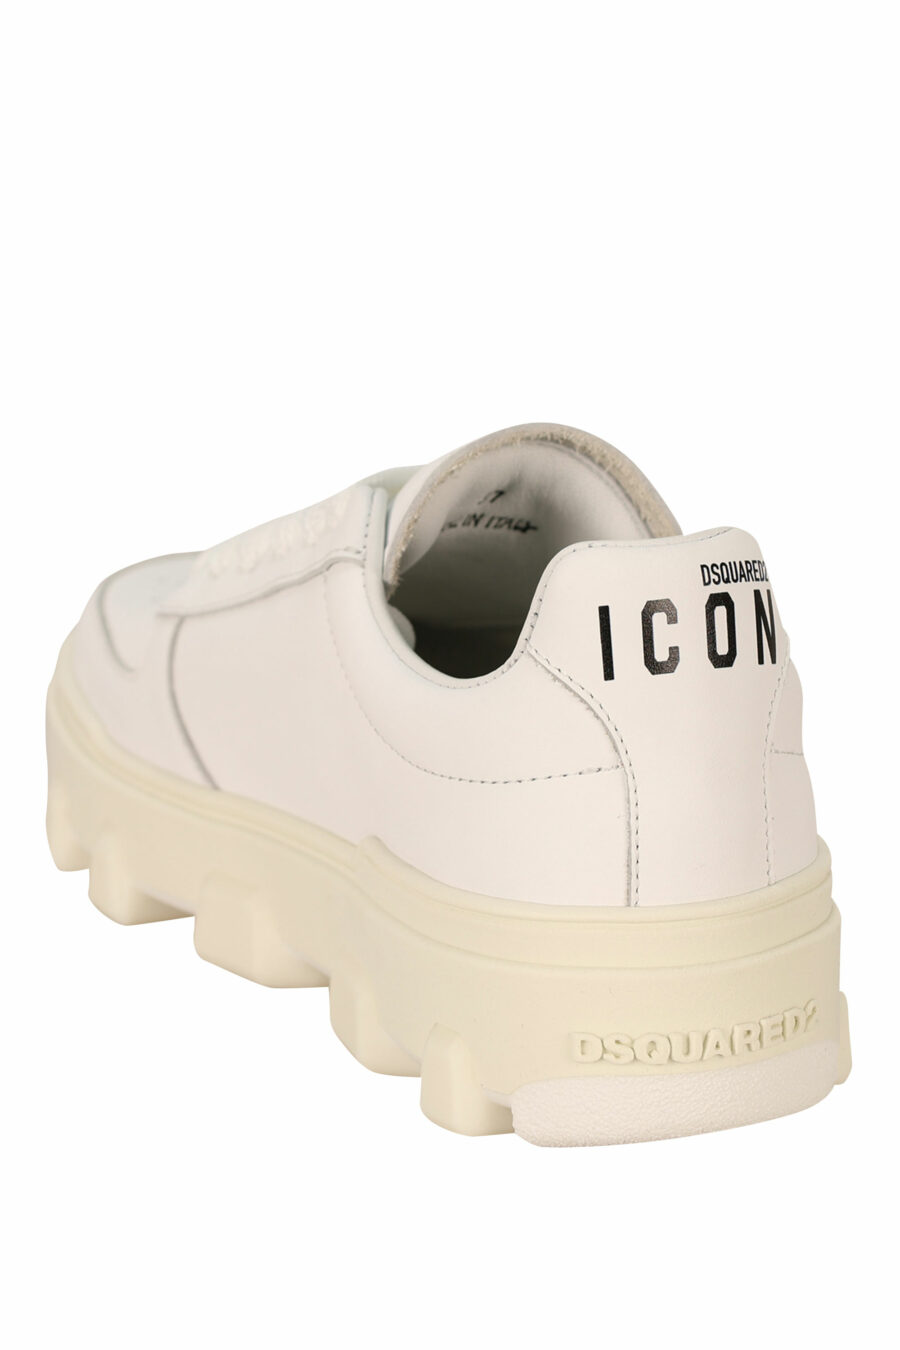 White trainers with white sole and logo - 8055777311240 3